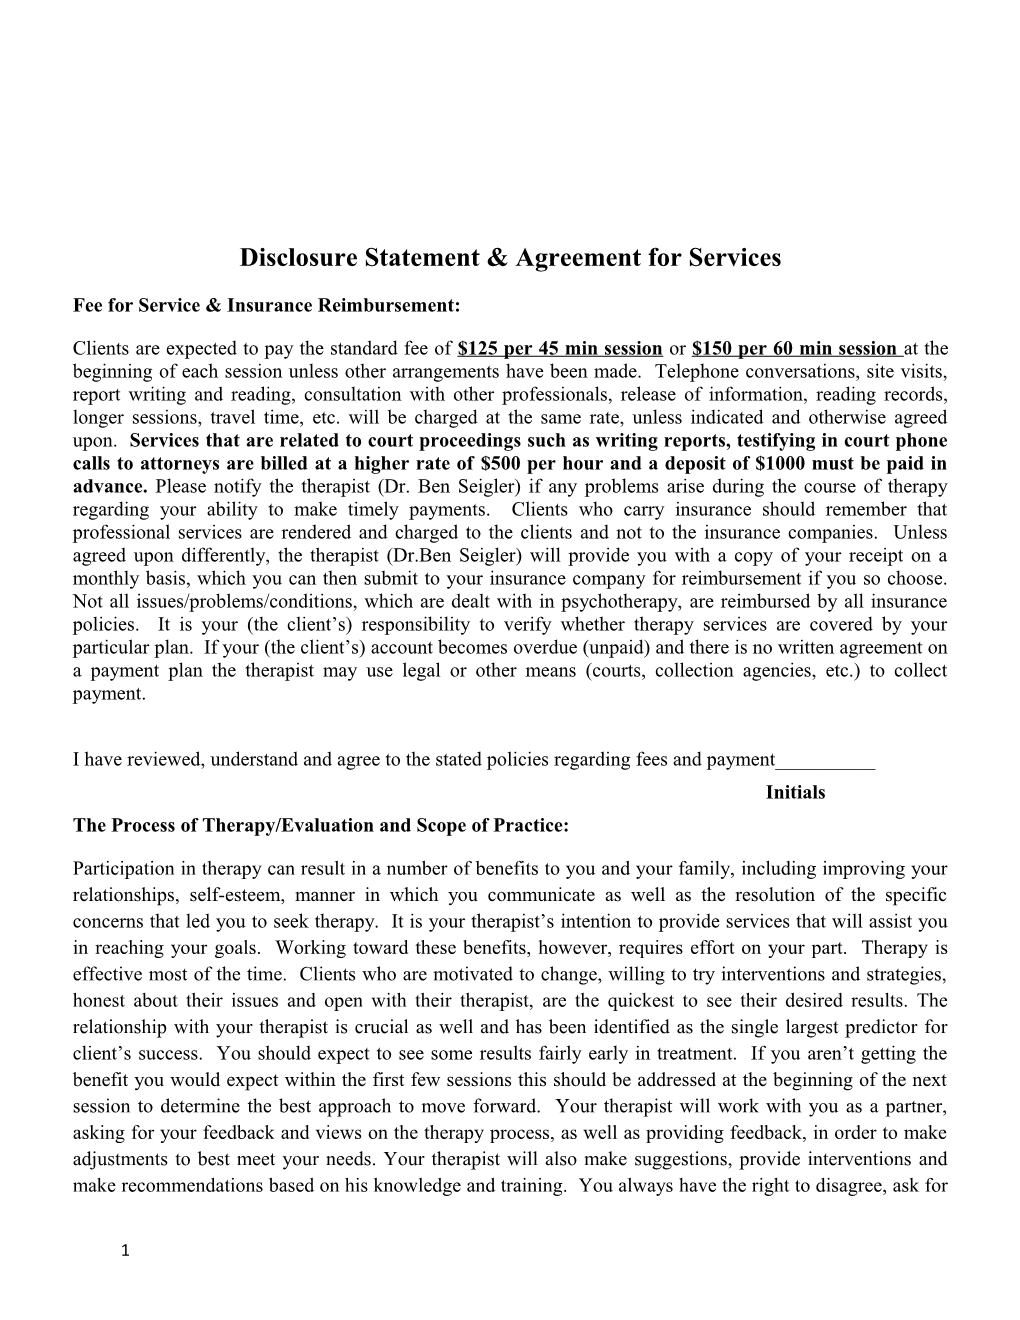 Disclosure Statement & Agreement for Services